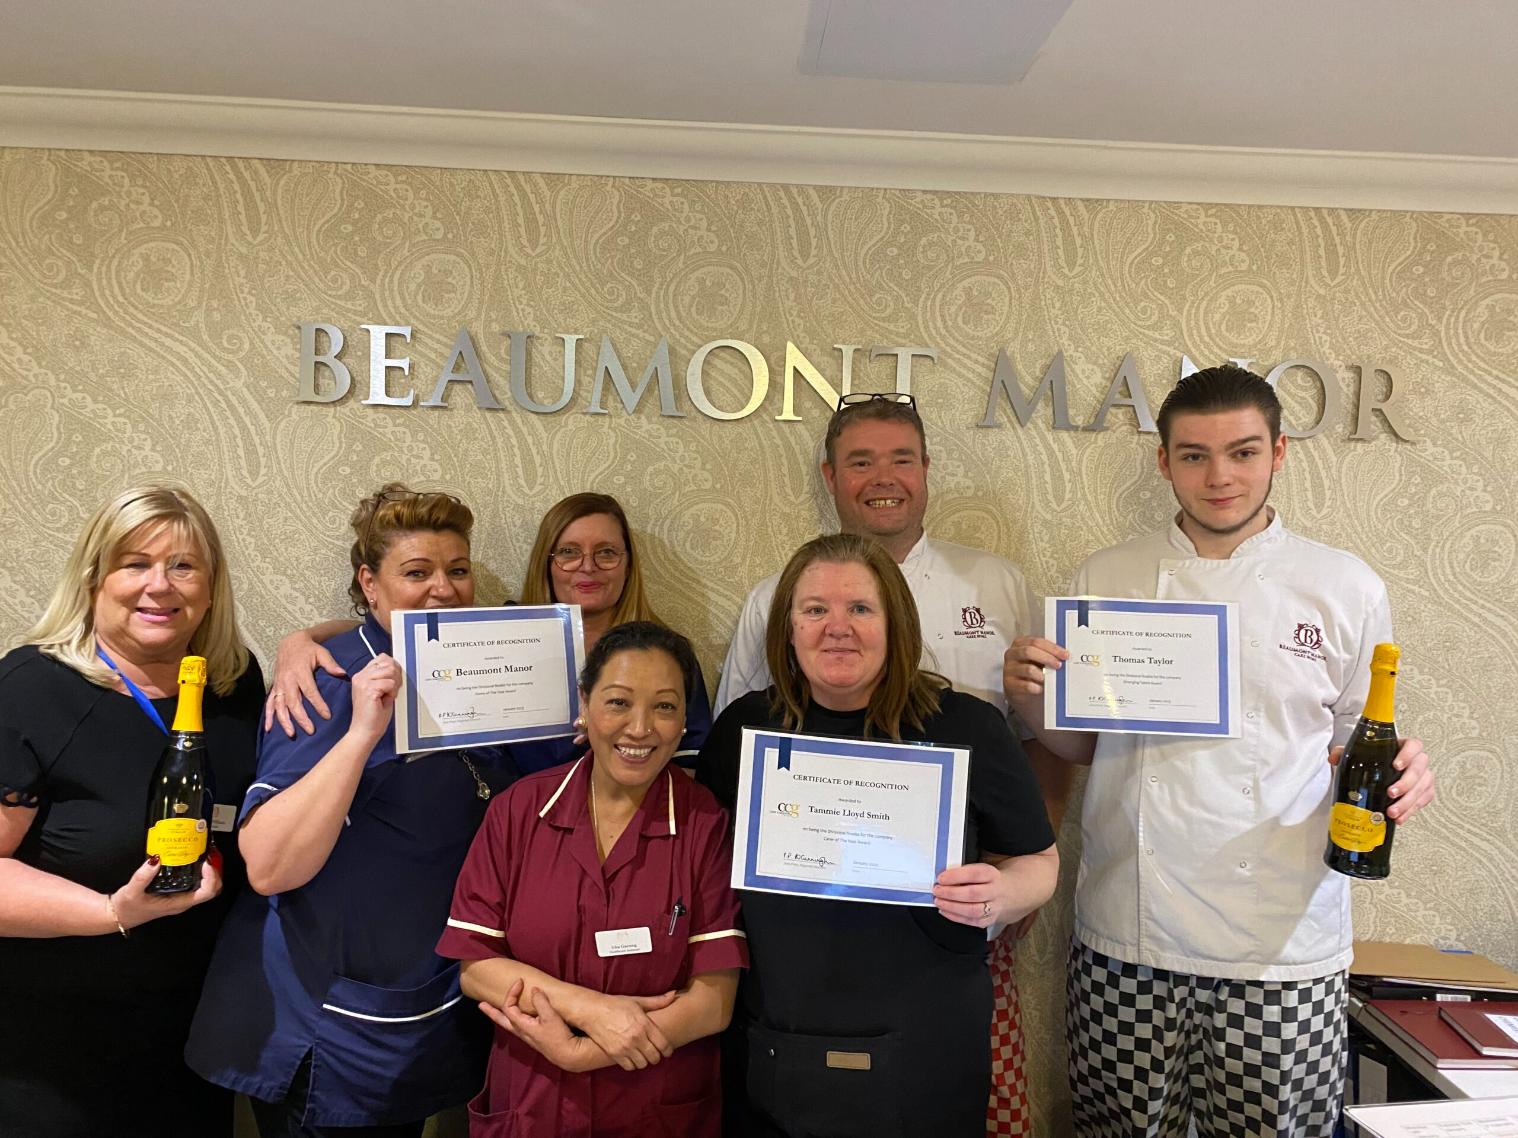 Beaumont Manor posing with their certificates